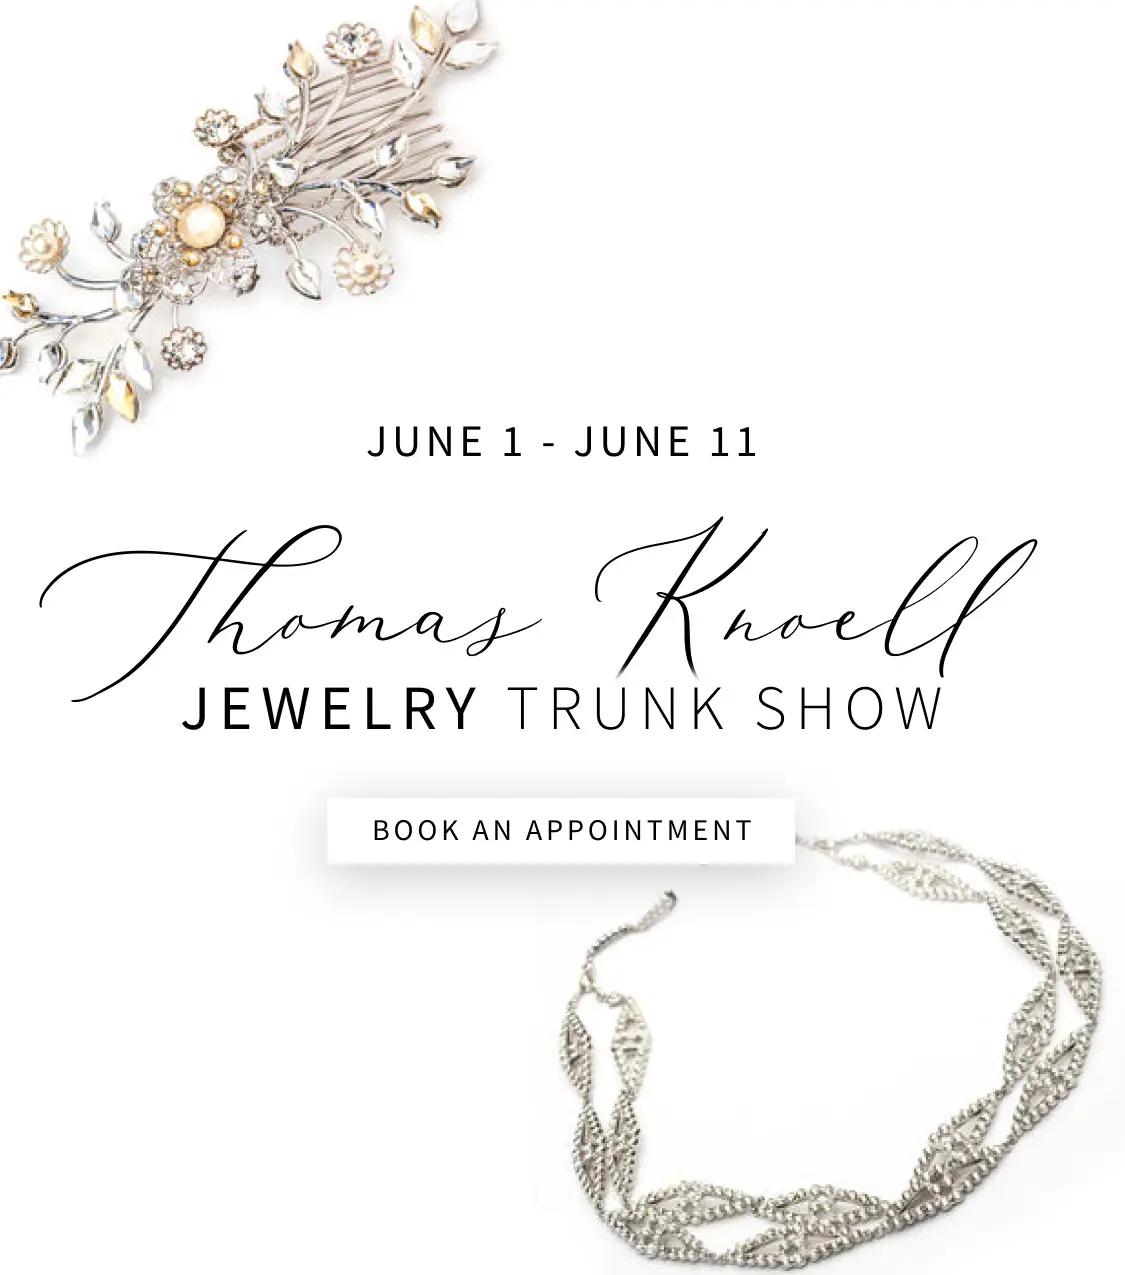 Thomas Knoell Jewelry Trunk Show June 1-11 banner for mobile